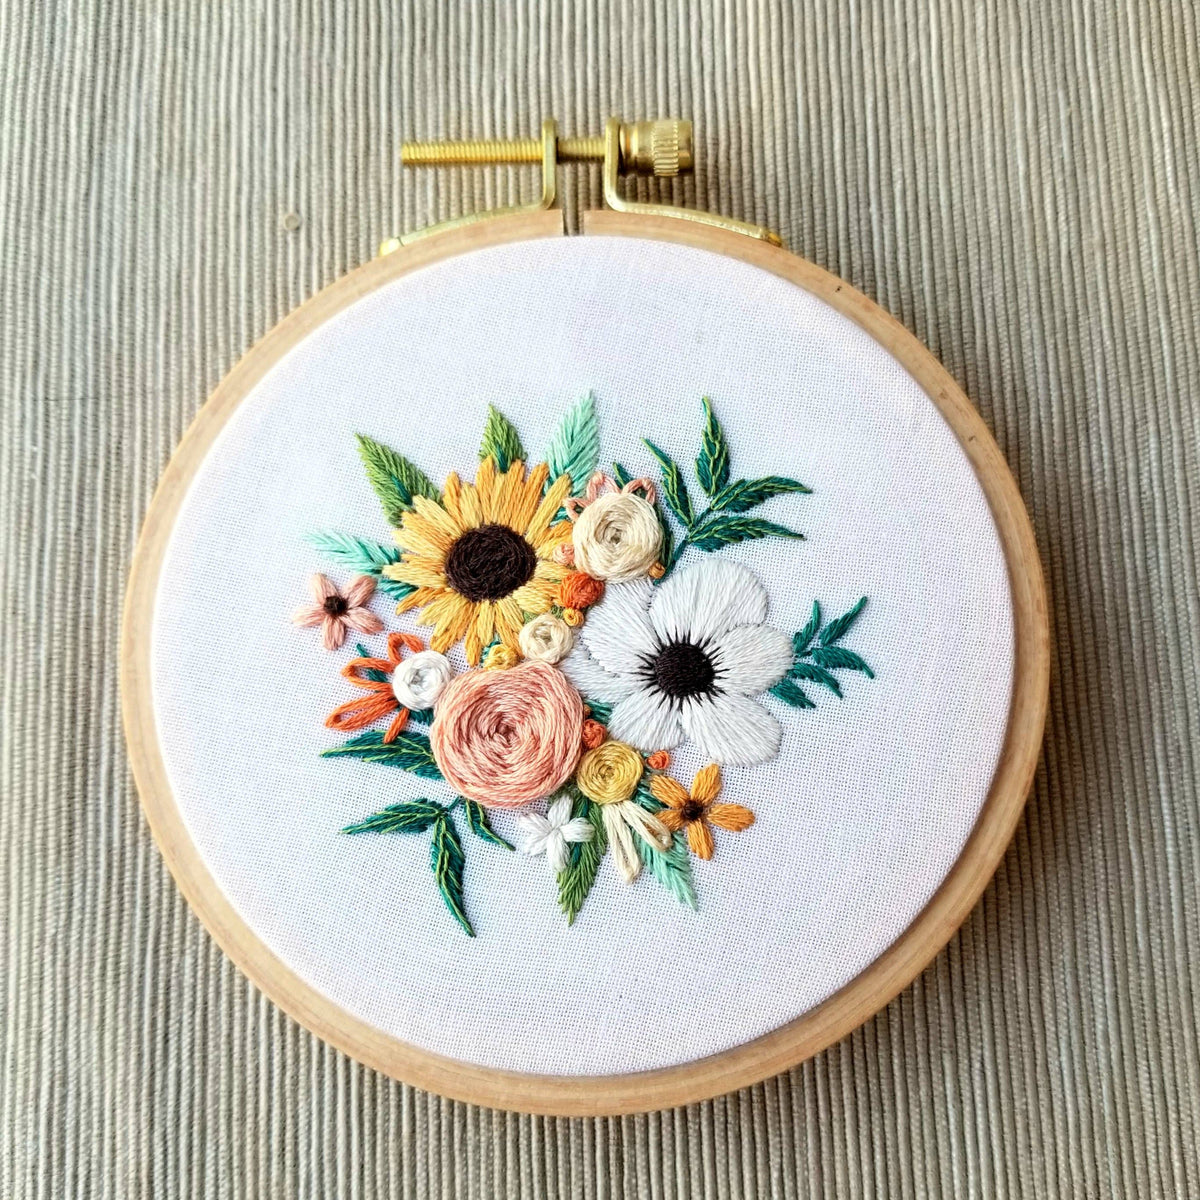 Jessica Long Embroidery Cozy Harvest Beginner Embroidery Kit